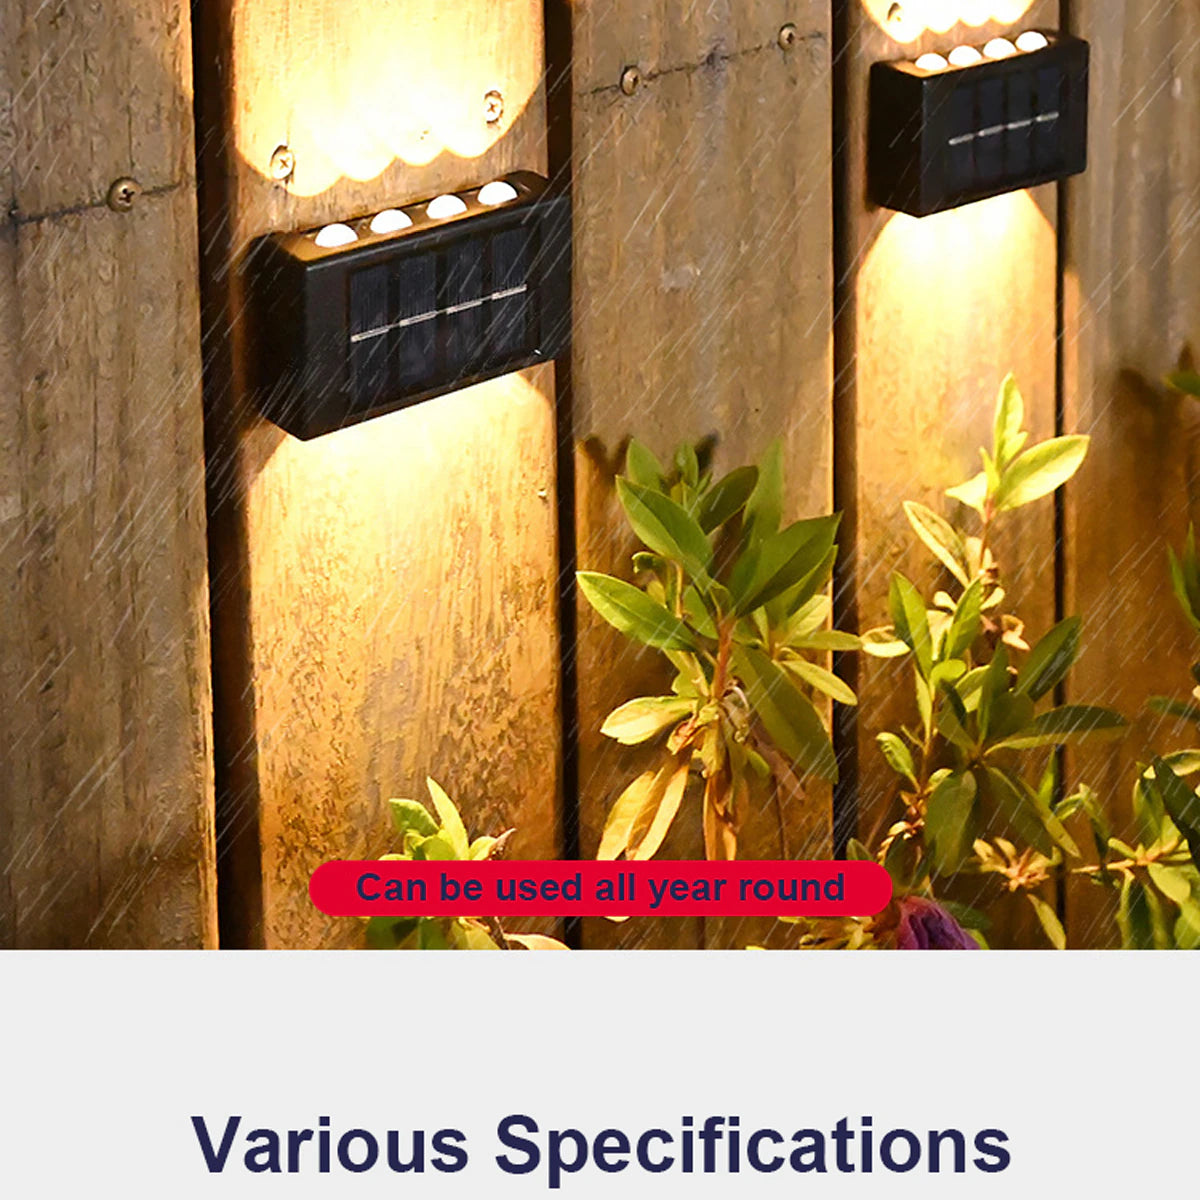 Solar Wall Lamp Outdoor Waterproof Up And Down Luminous Lights